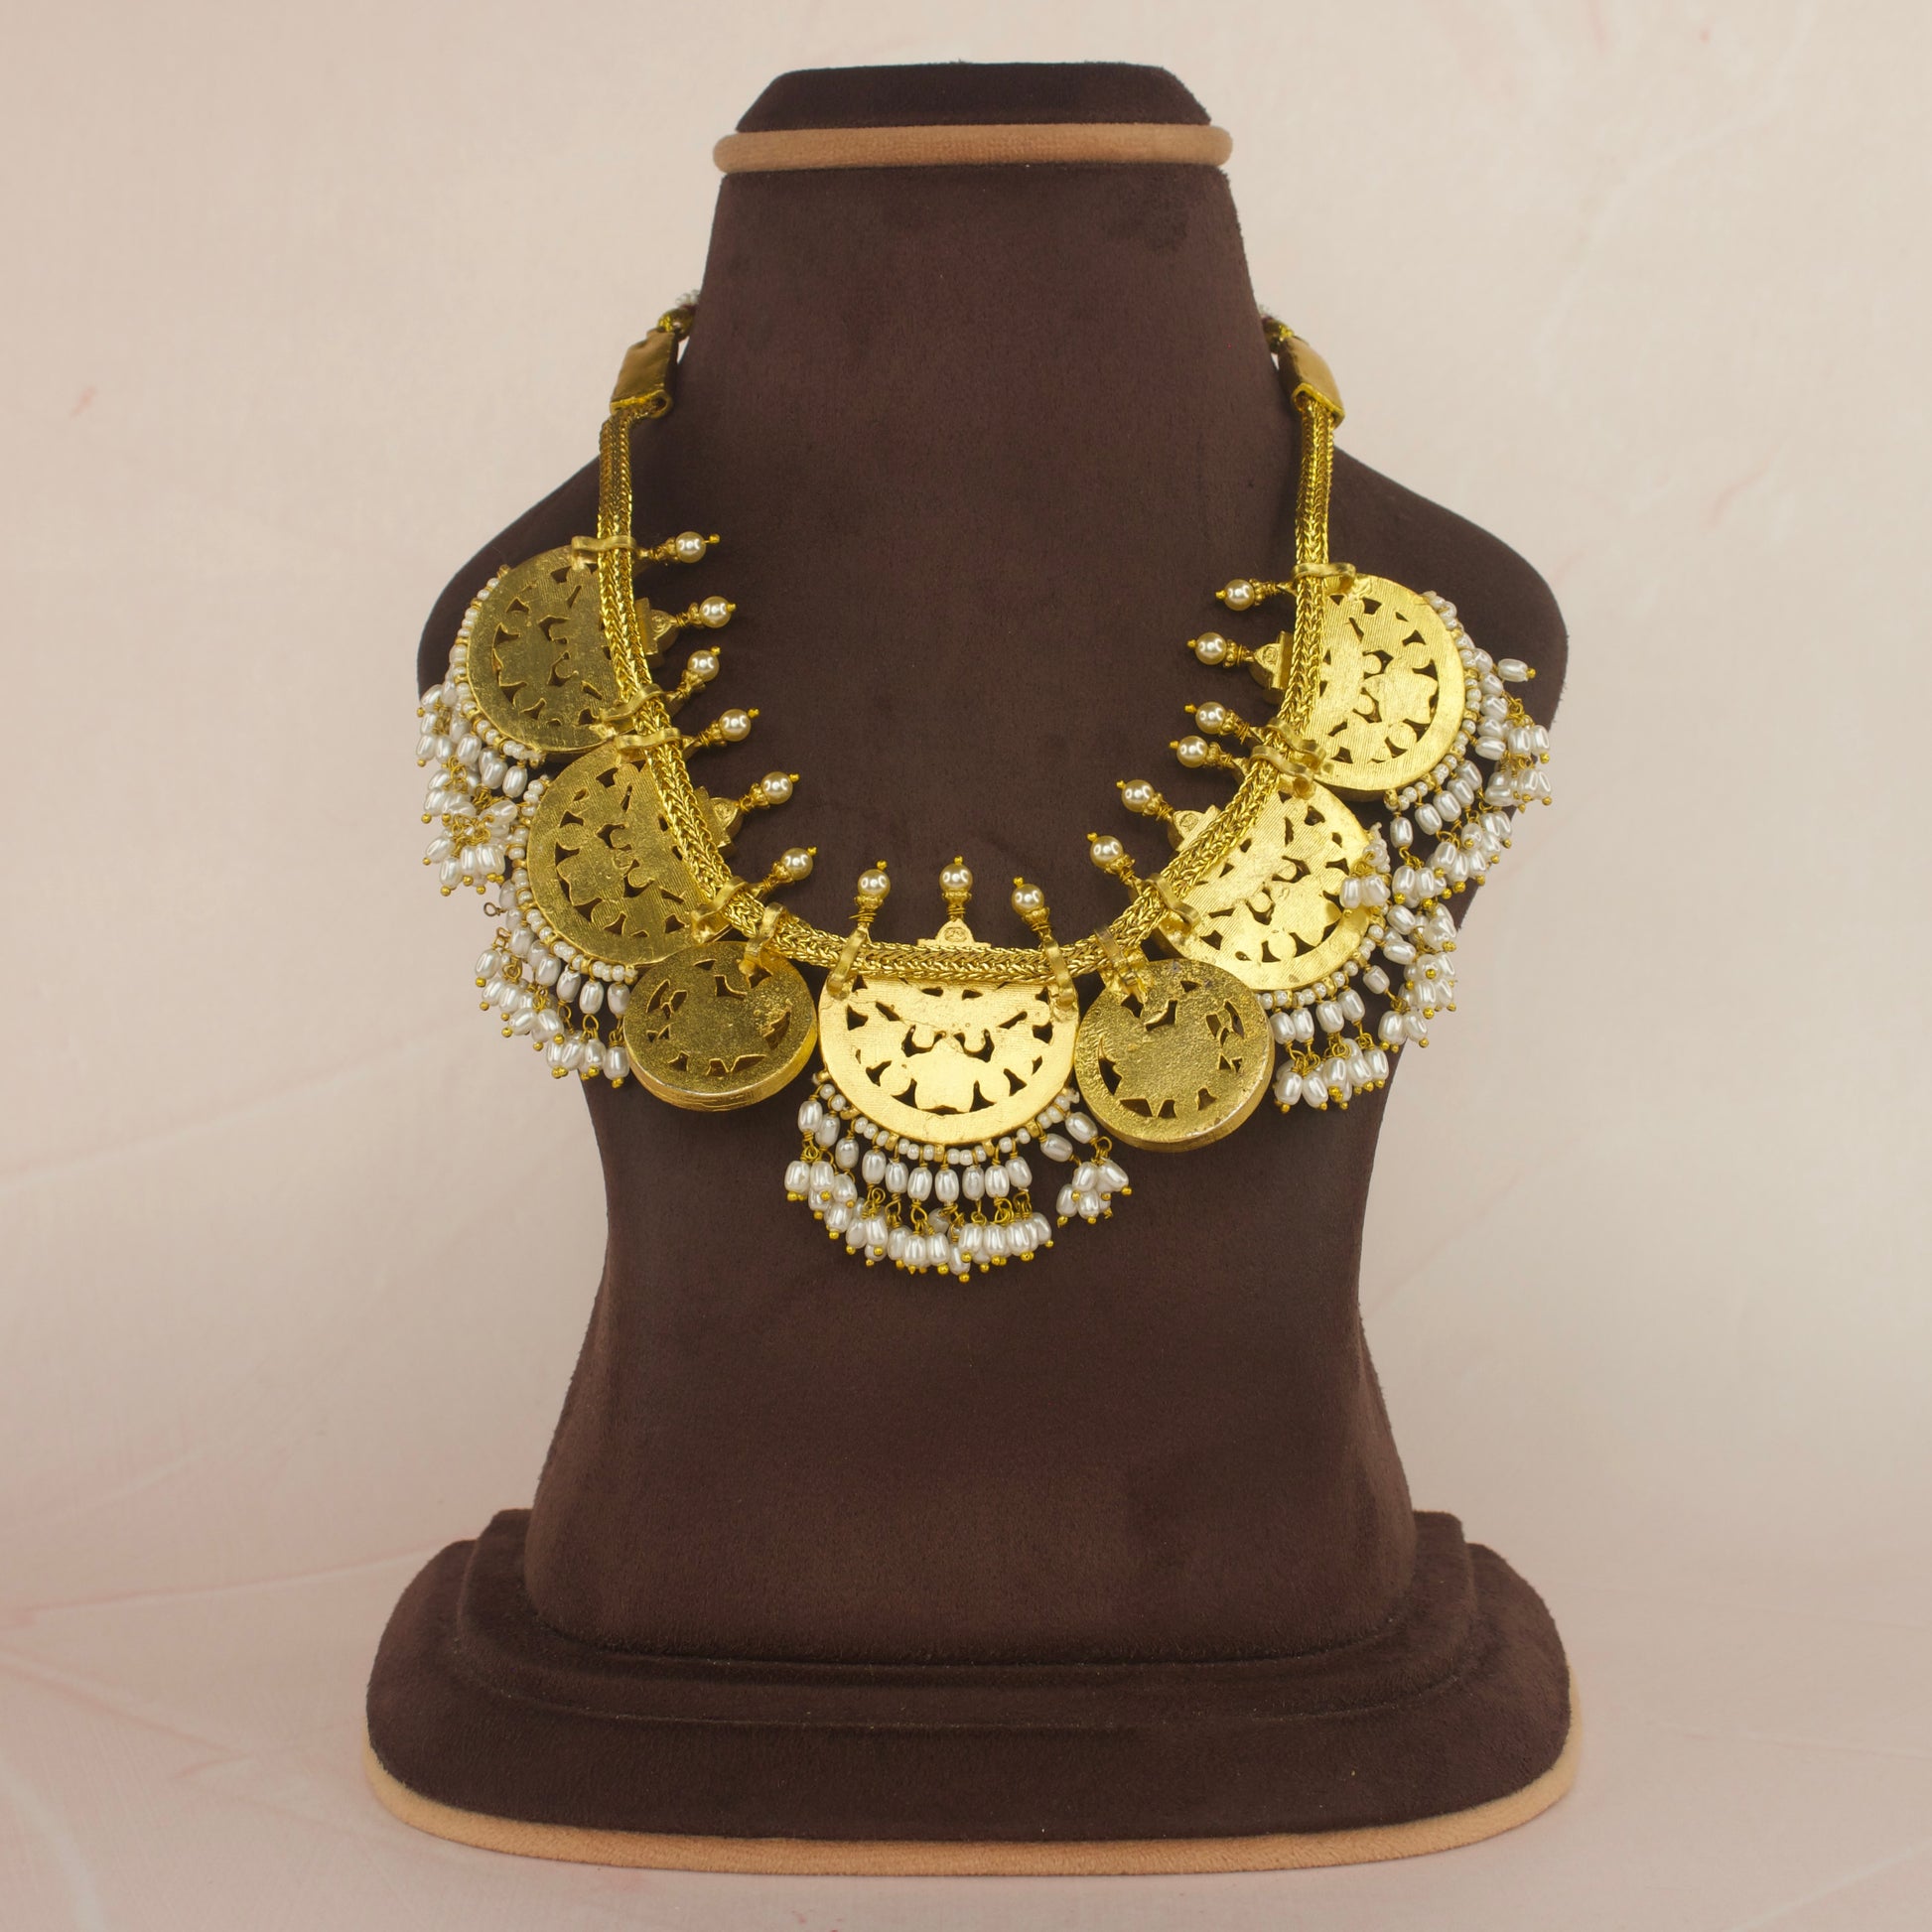 Opulent Jadau Kundan Necklace Adorned with Gleaming Rice Pearls with 22k gold plating This product belongs to Jadau Kundan jewellery category 